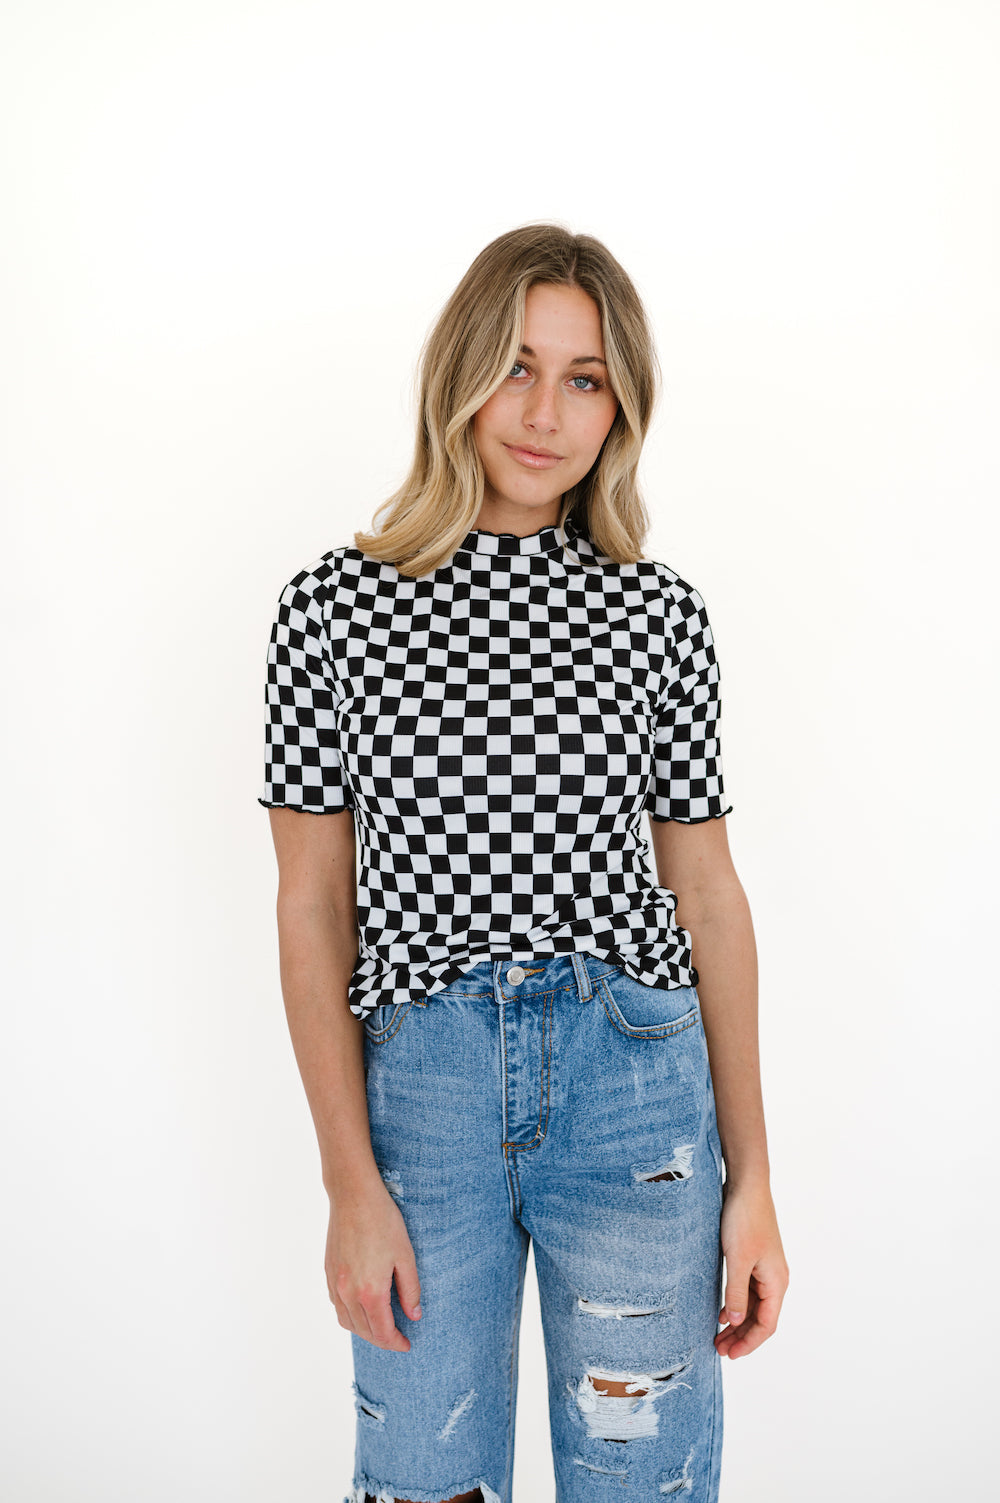 Black and white checkered top